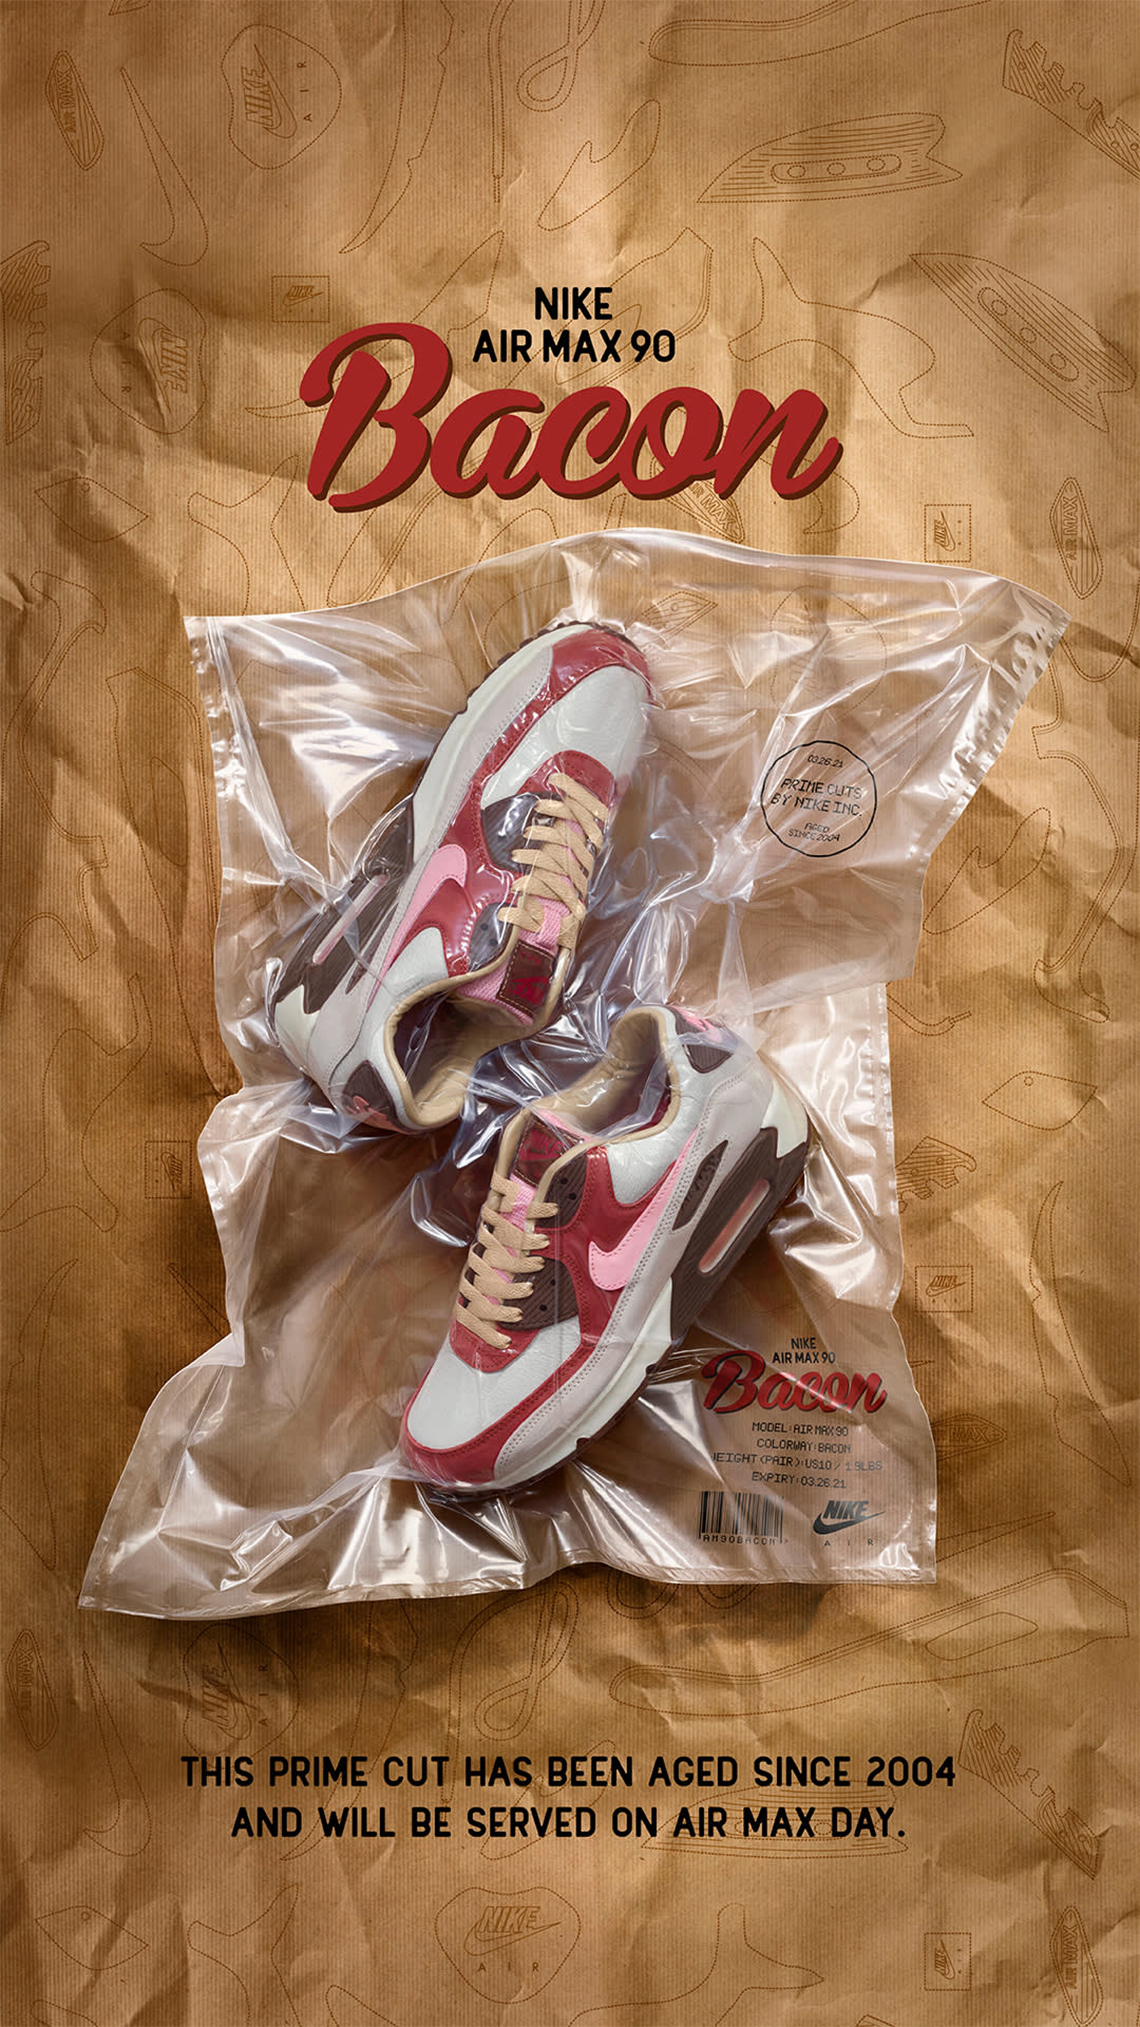 Nike Air Max 90 Bacon 2021 Release Date 1